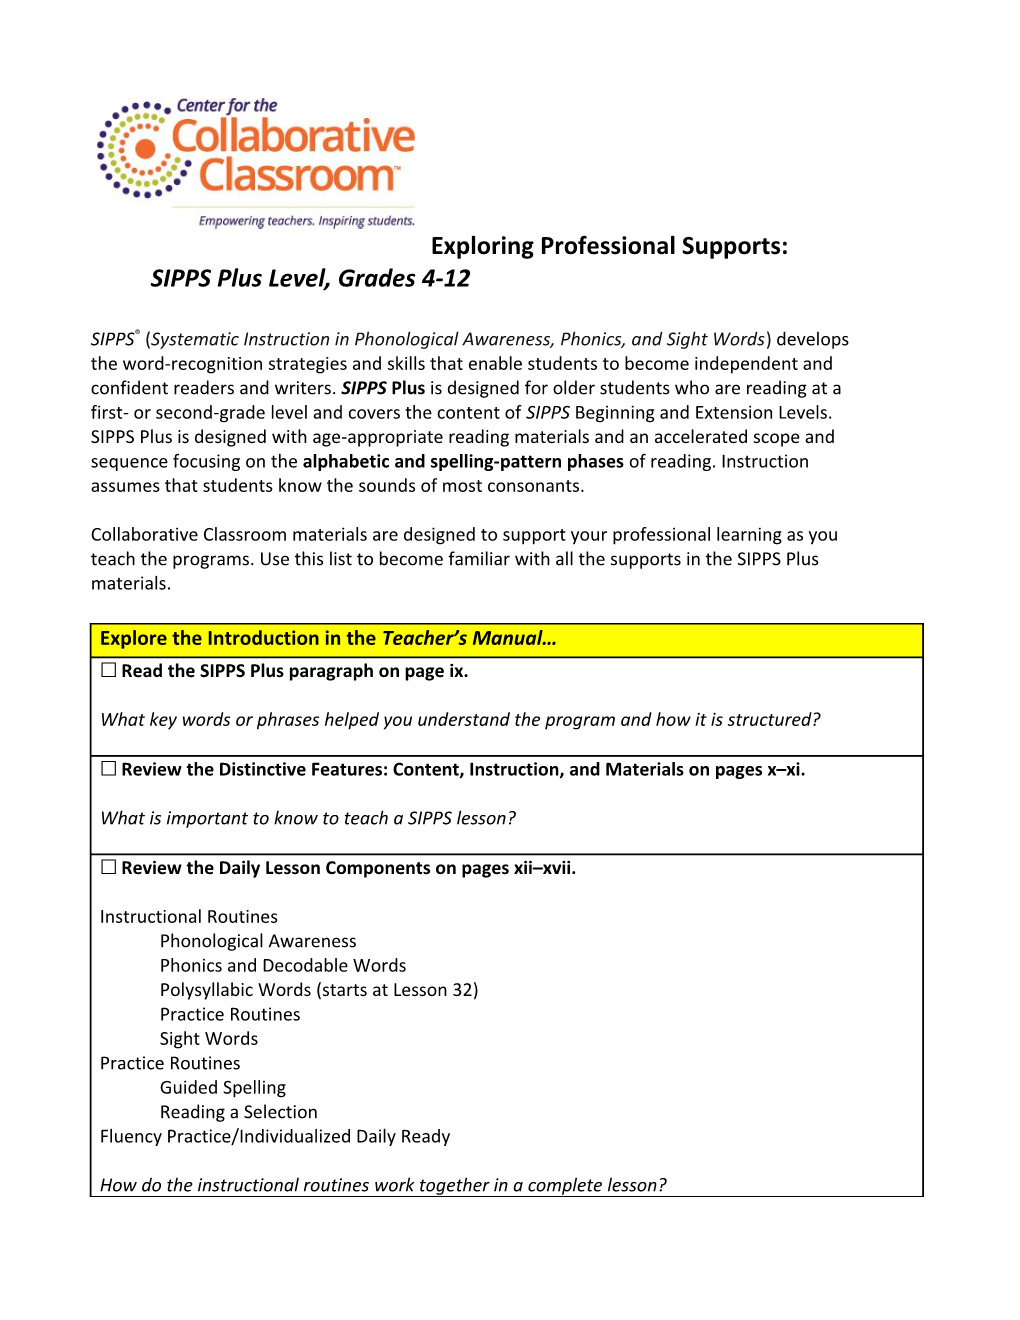 Exploring Professional Supports: SIPPS Plus Level, Grades 4-12